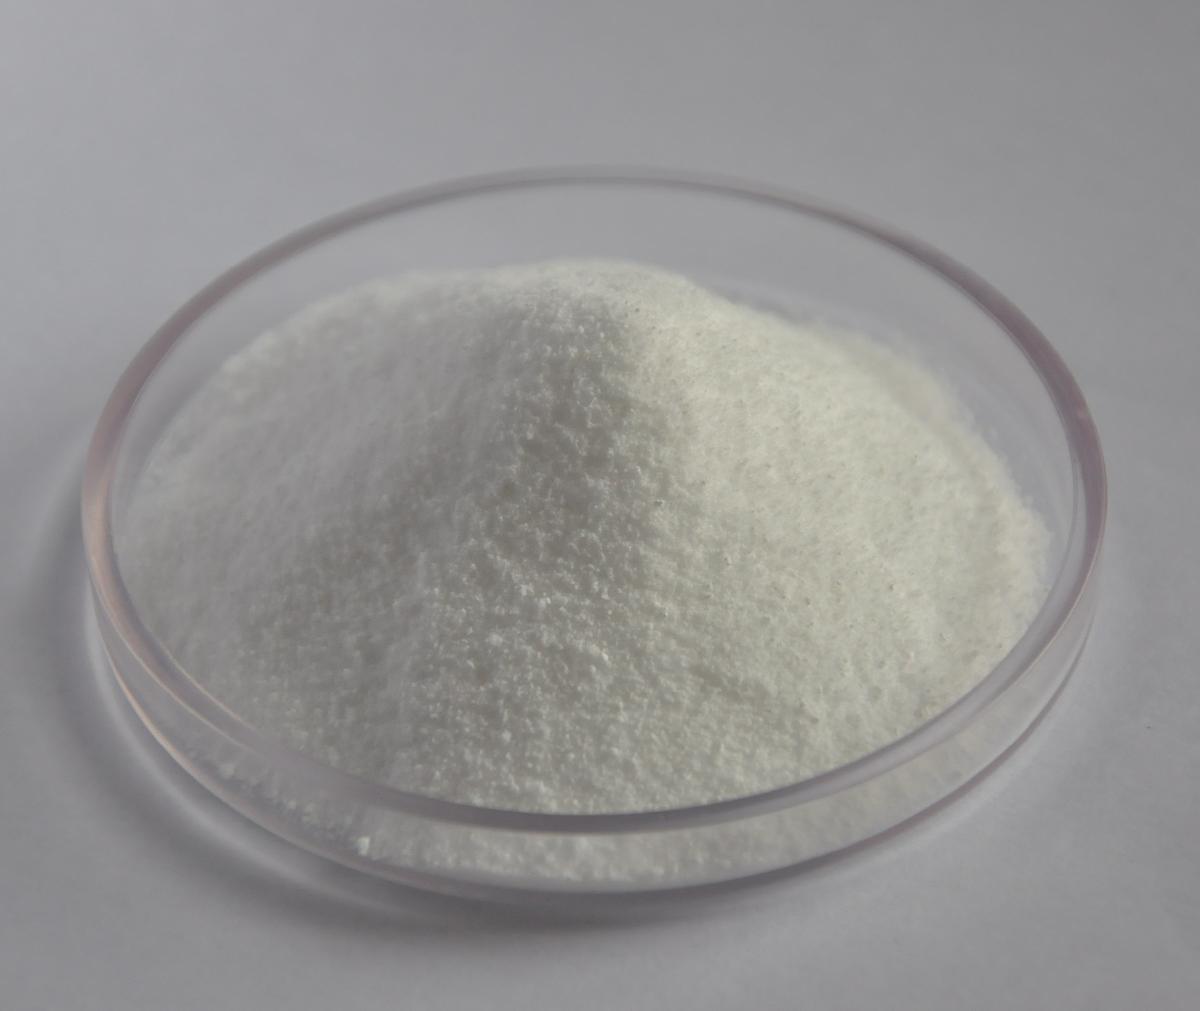 Trehalose Dihydrate Market: Comprehensive Study on Key Trends, Drivers, and Challenges Impacting the Global Market Growth for Trehalose Dihydrate